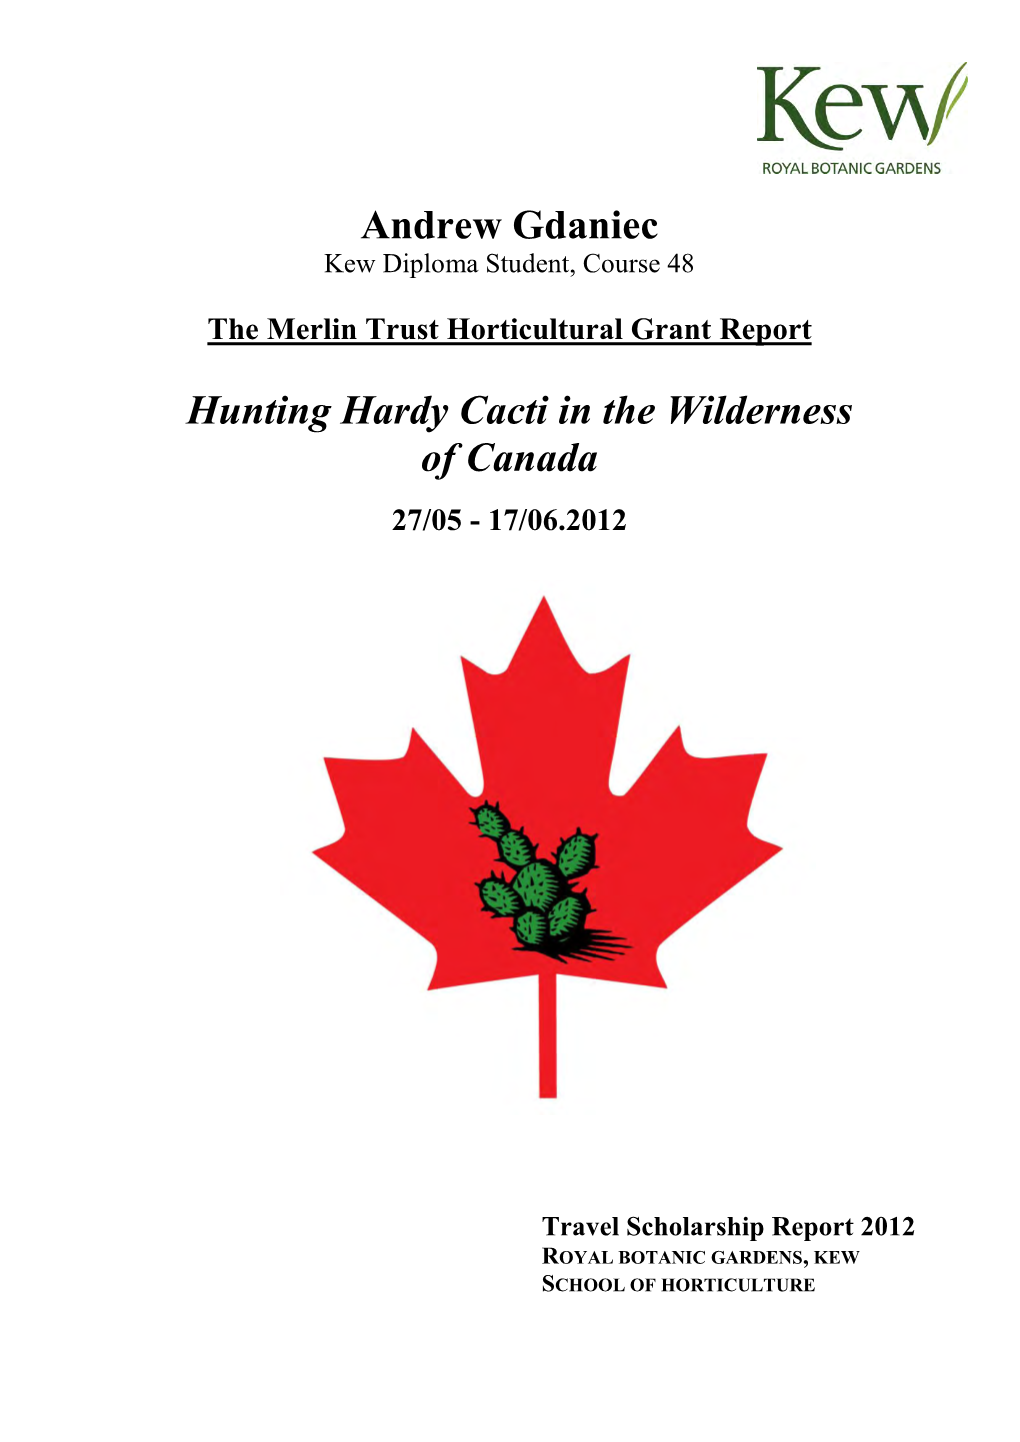 Andrew Gdaniec Hunting Hardy Cacti in the Wilderness of Canada